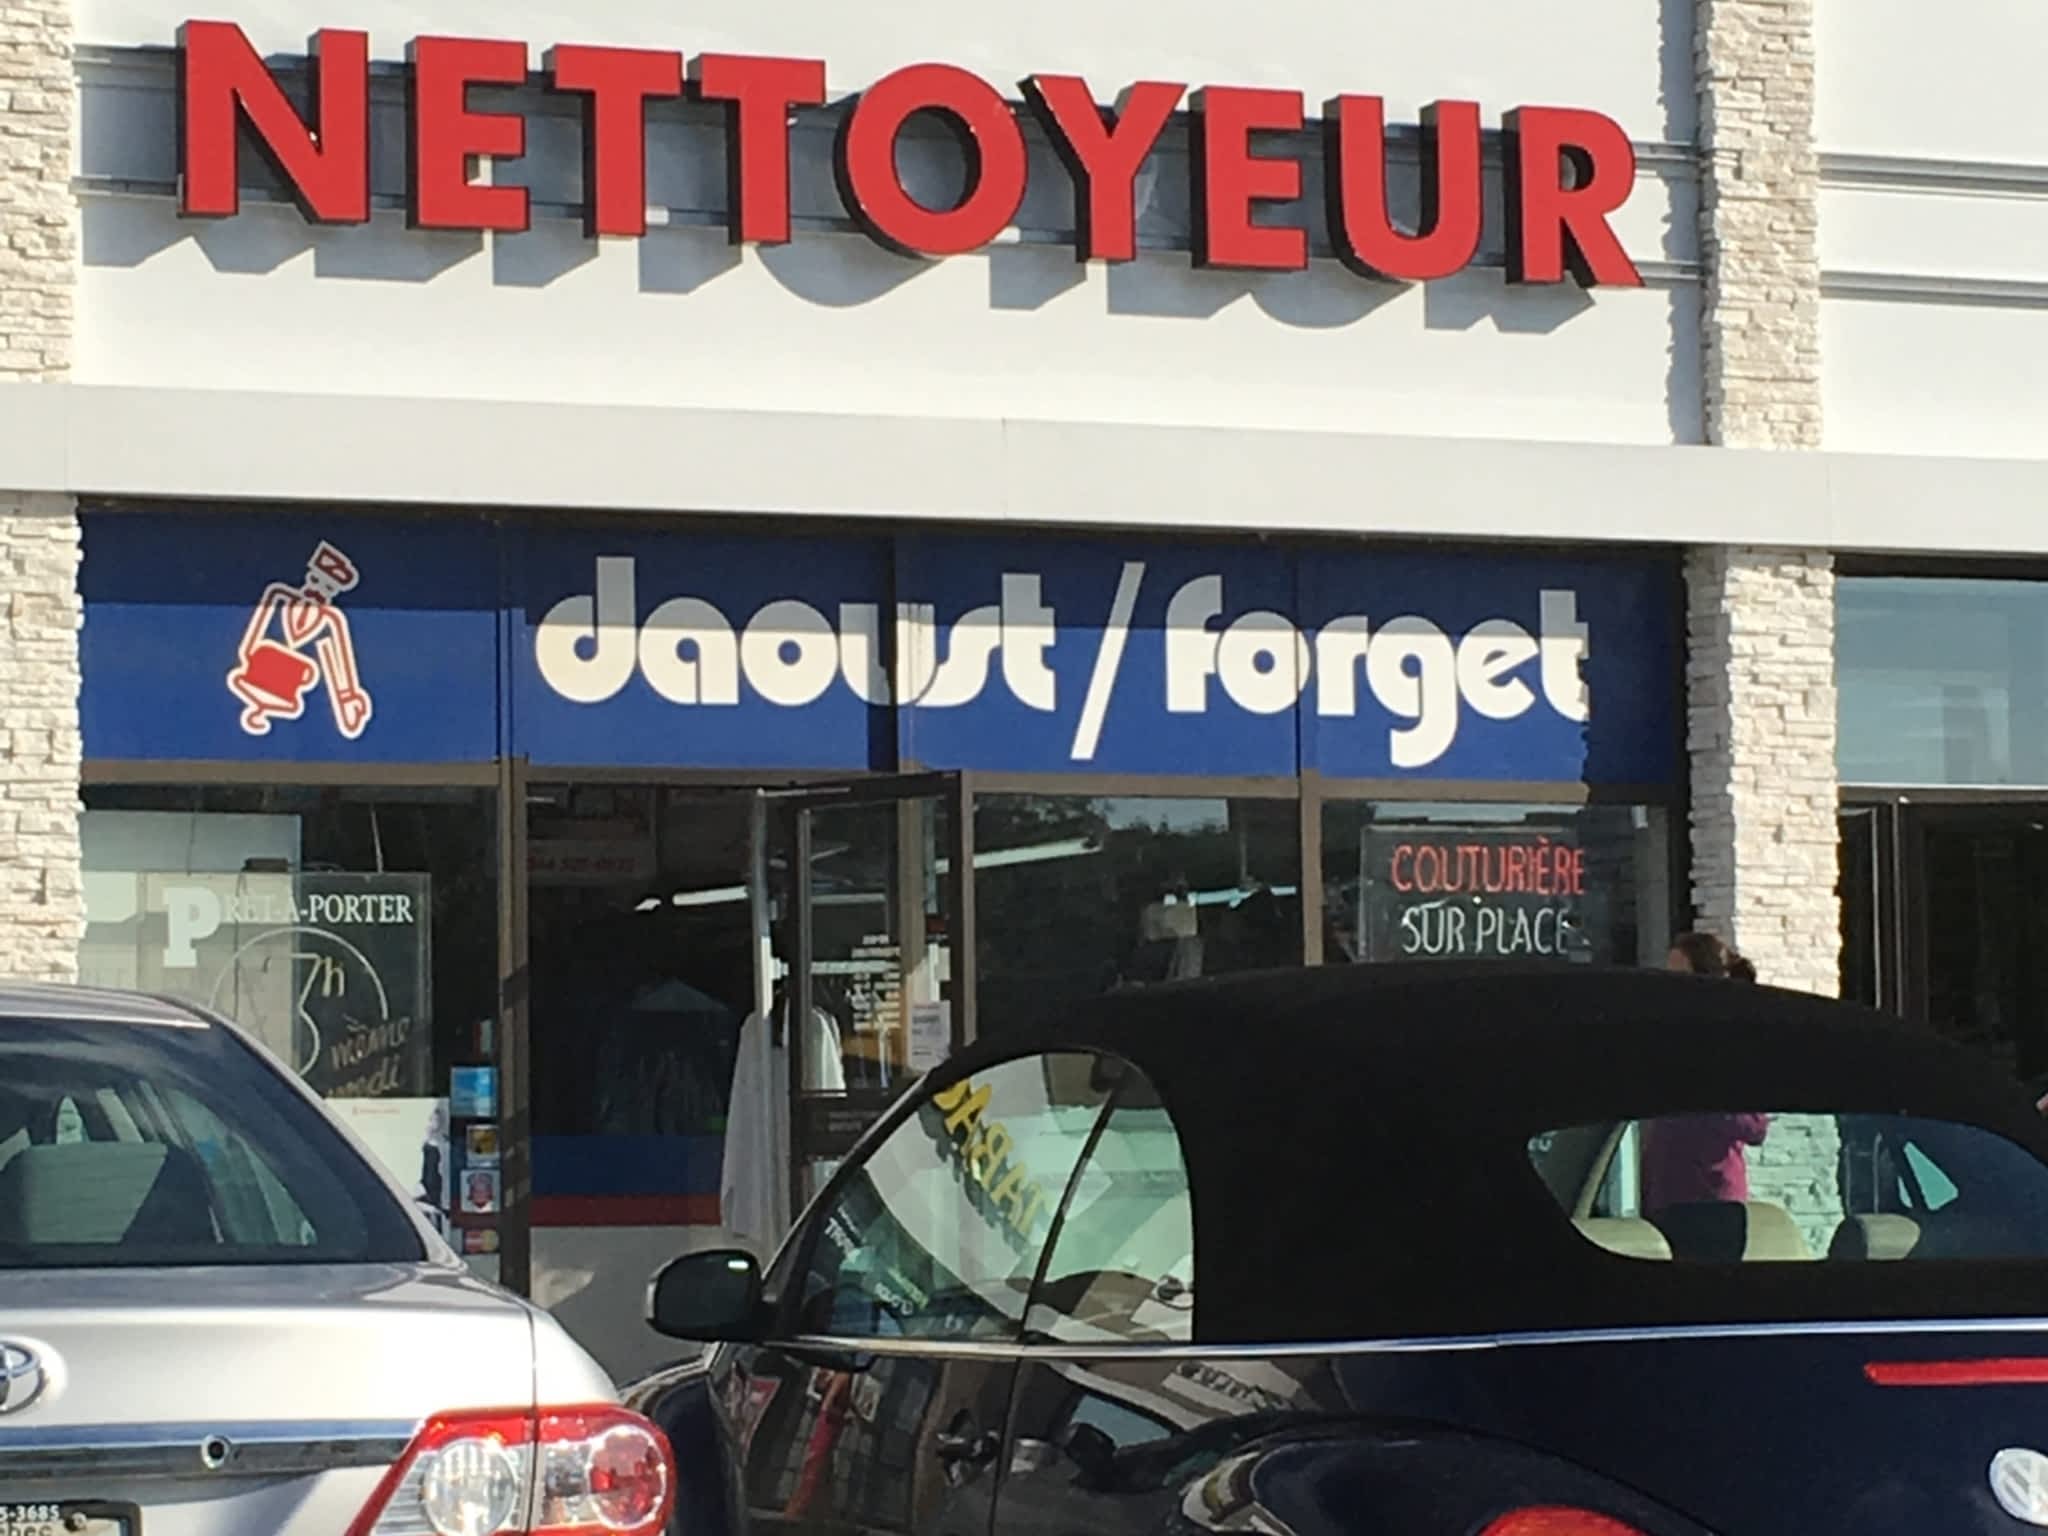 photo Nettoyeur Daoust-Forget